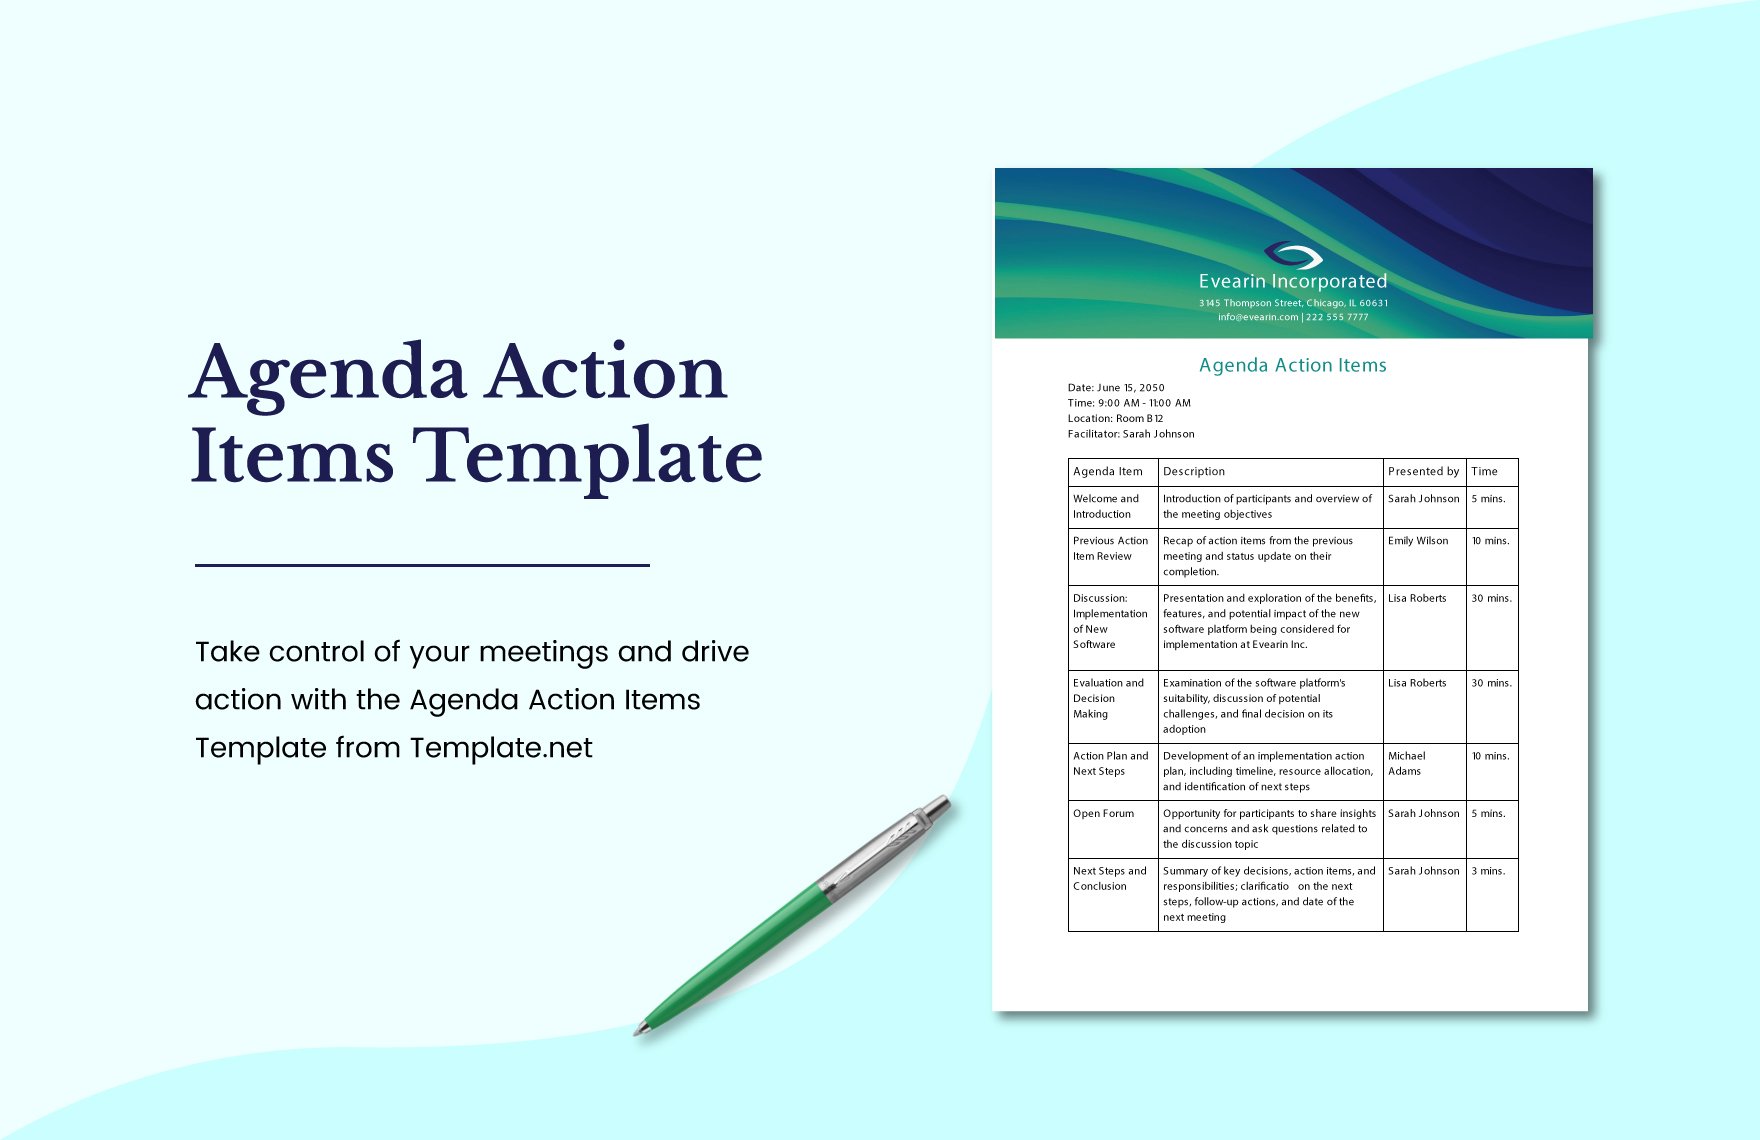 Agenda Action Items Template in Word, Google Docs